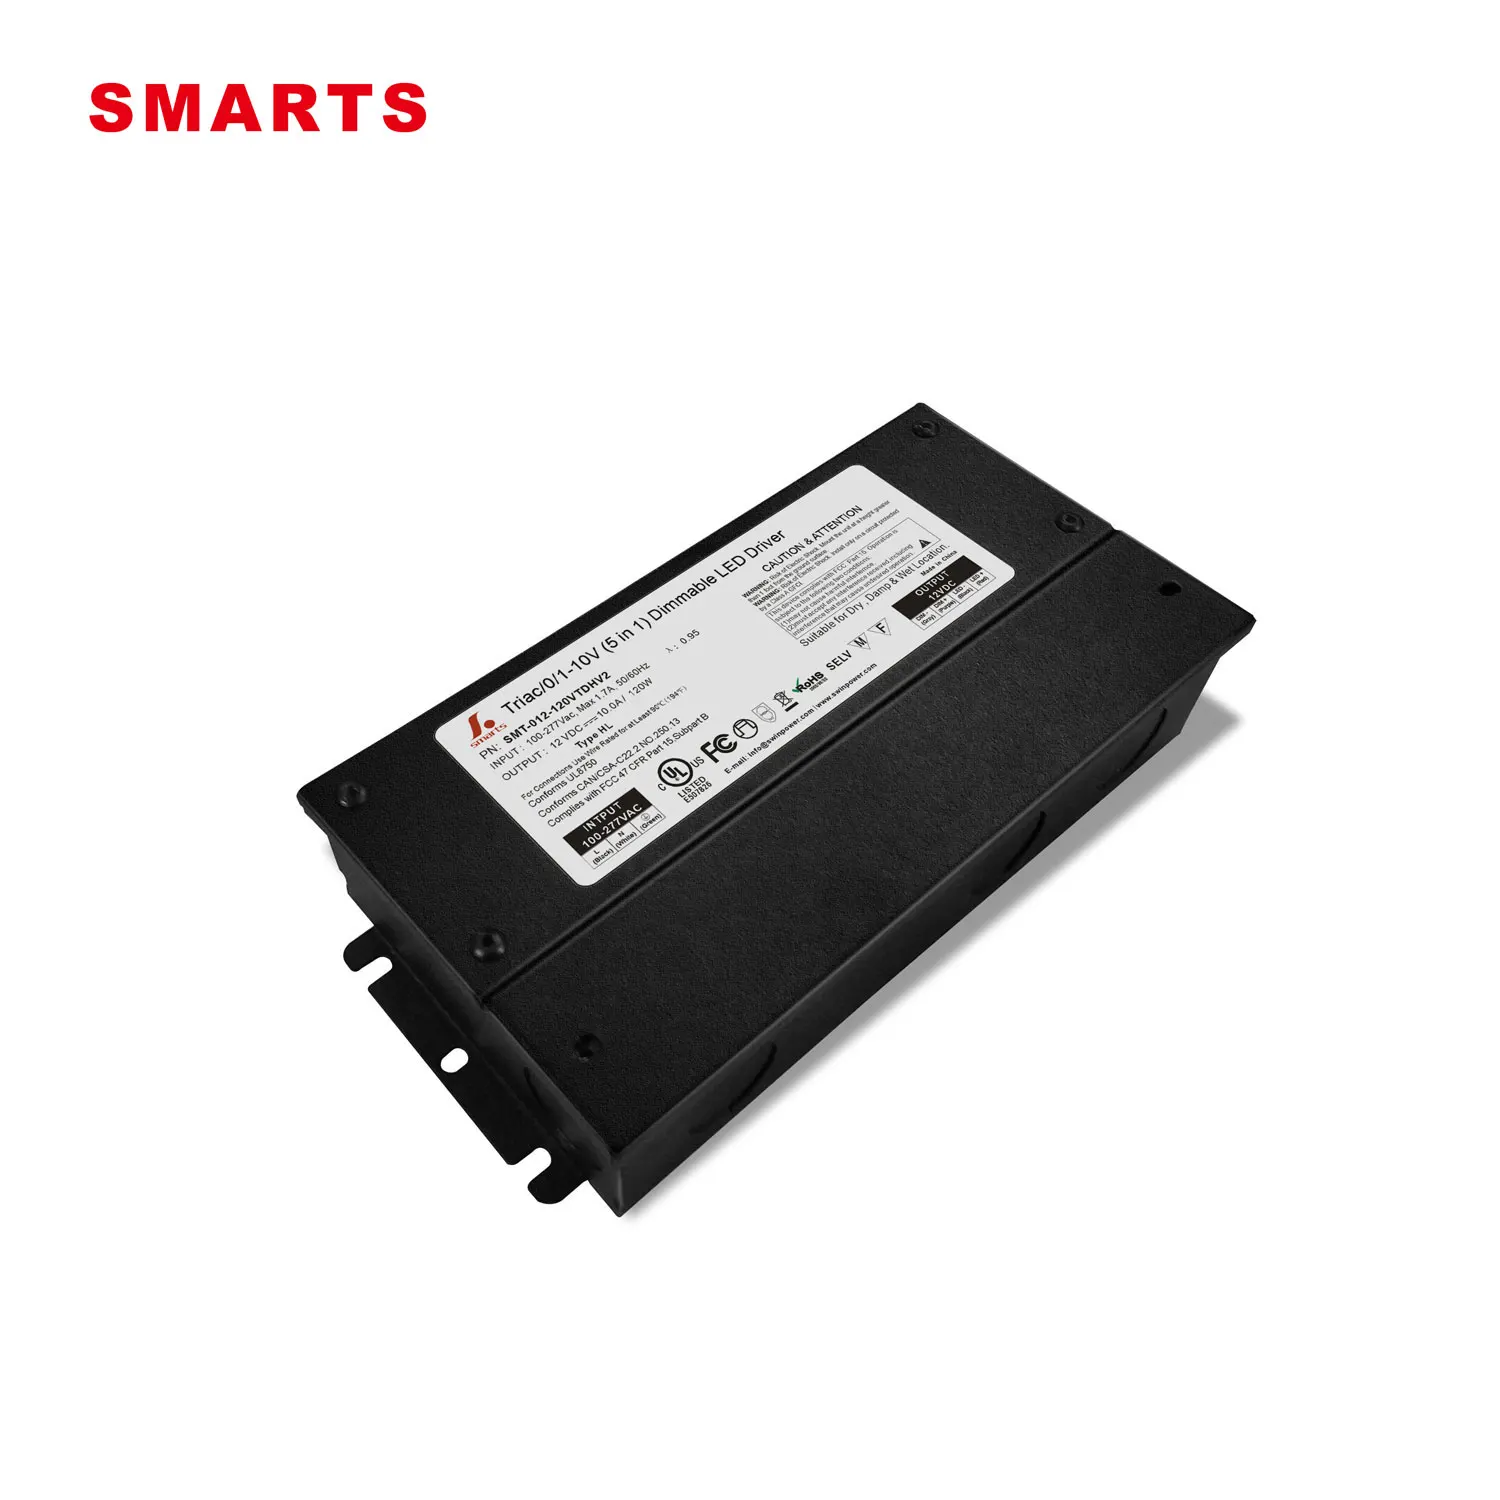 12v 120w constant voltage power supply for Led strip 5 dans 1 dimmable led driver